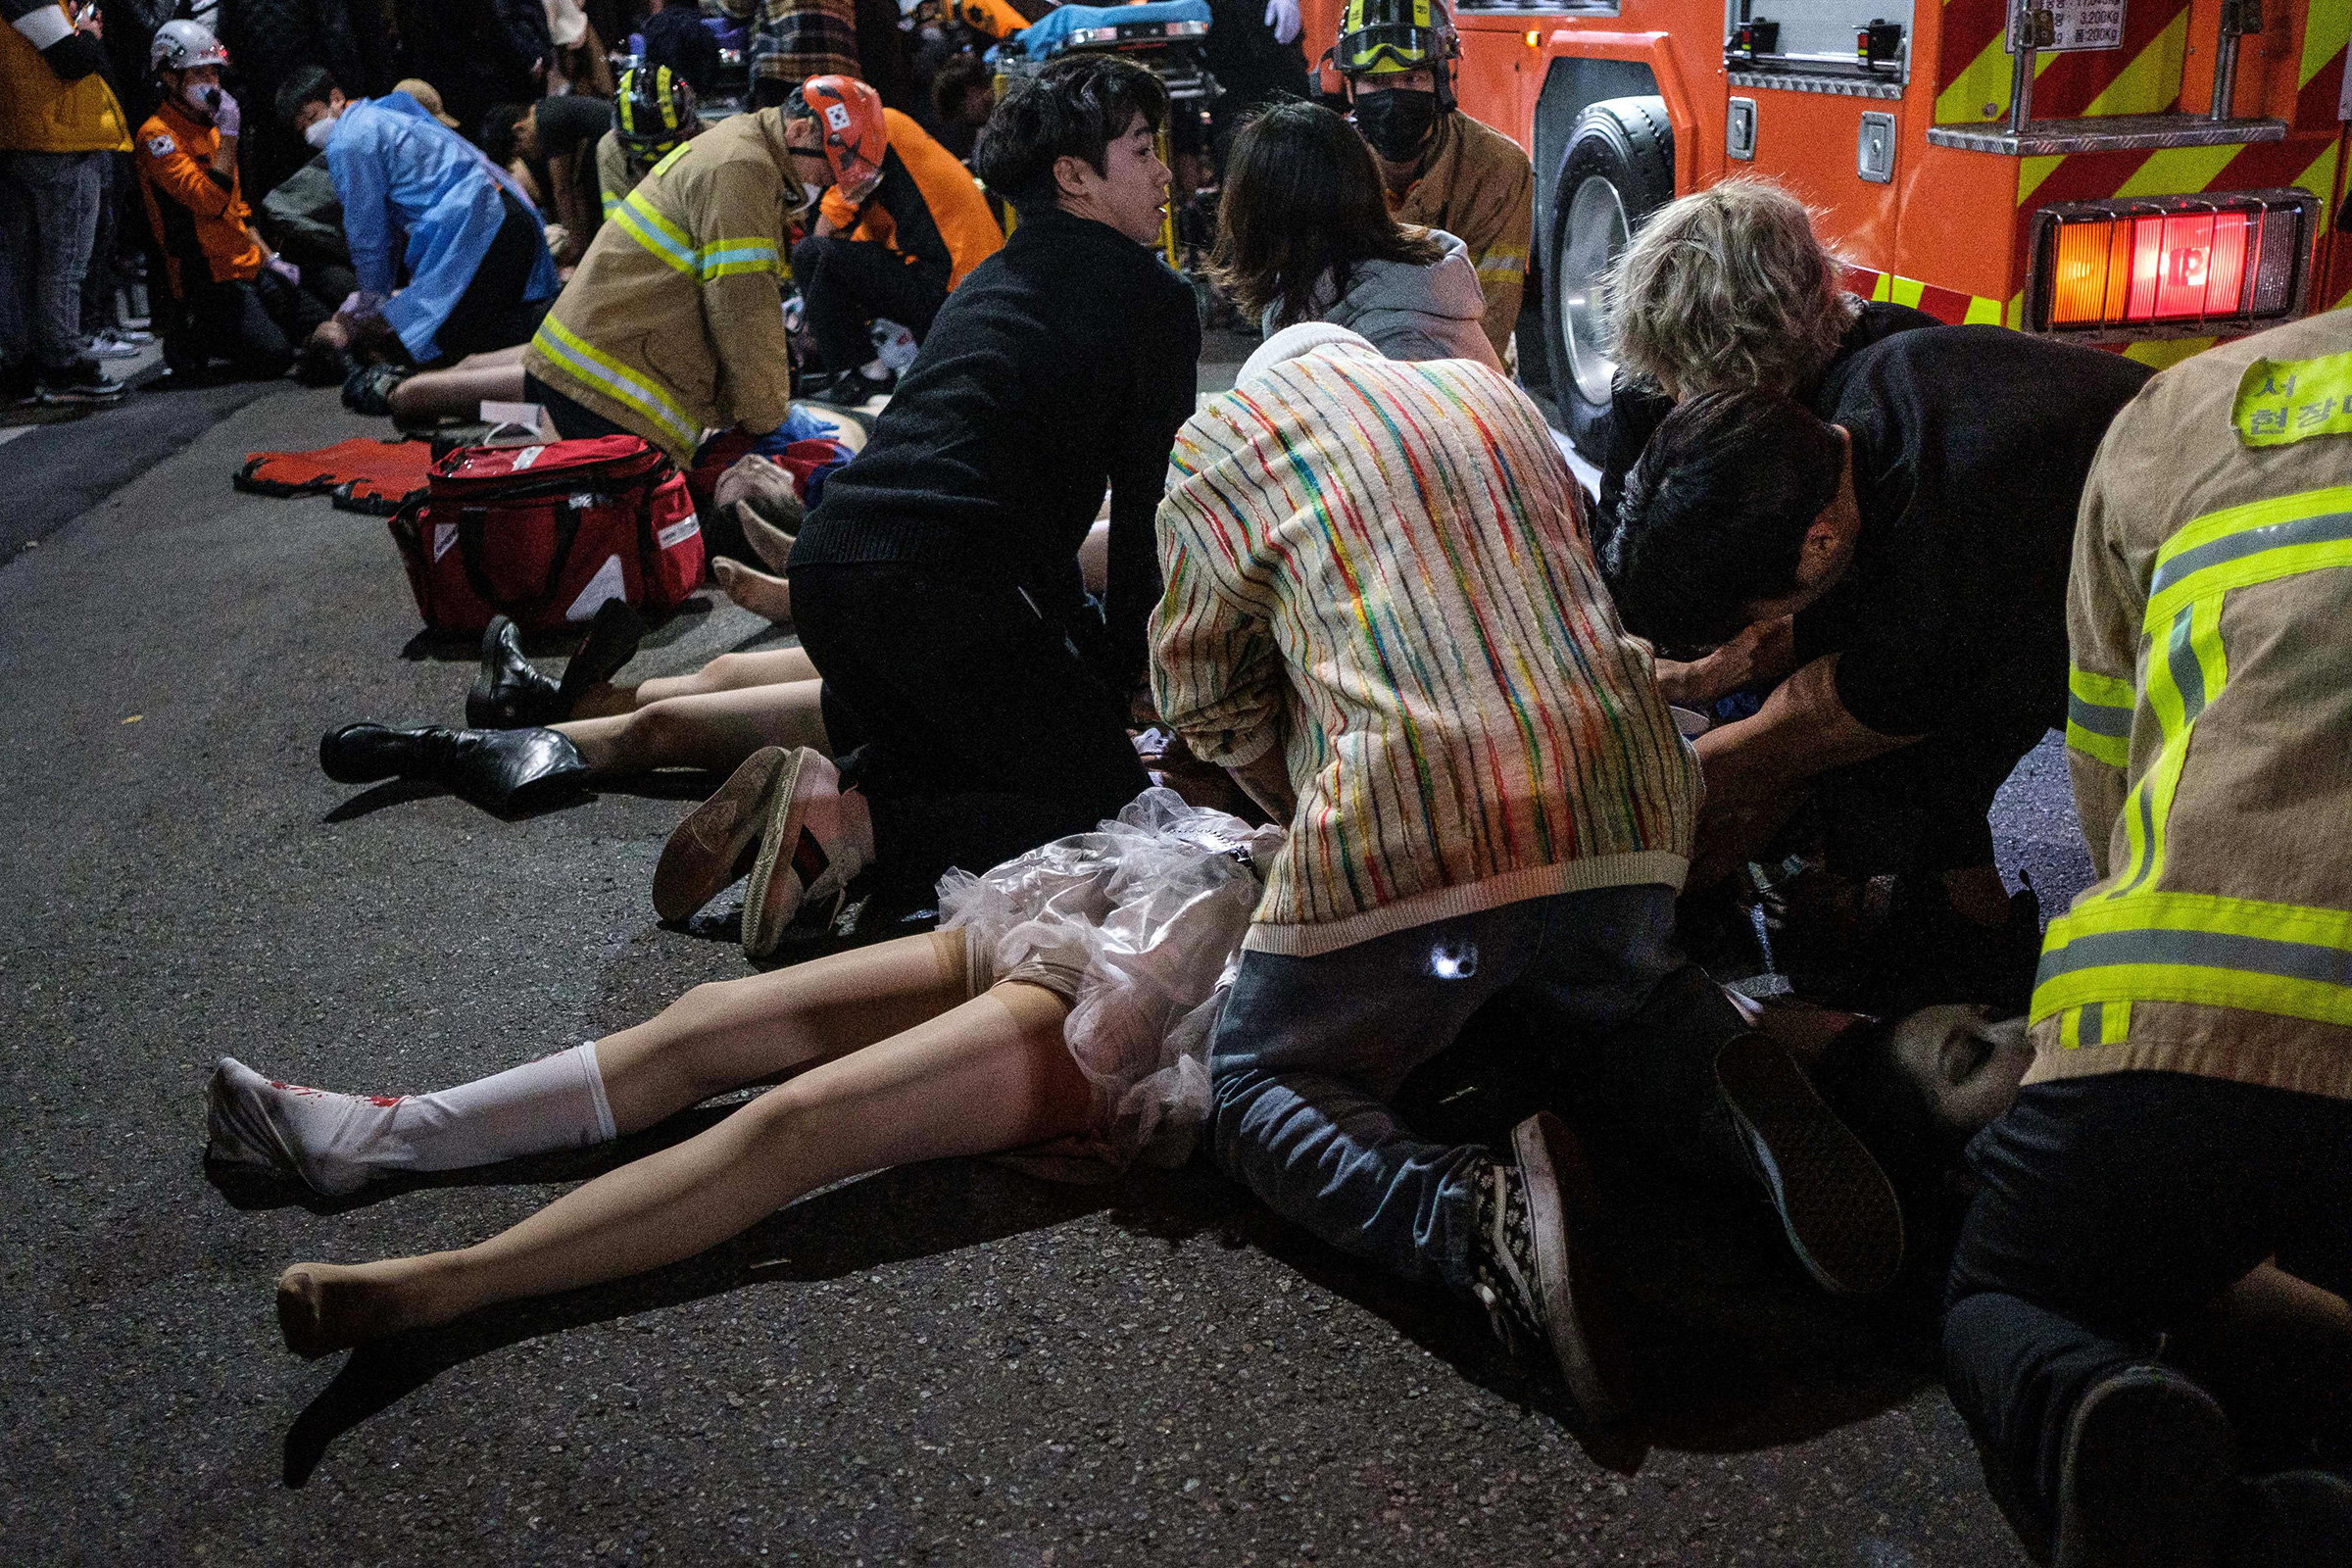 Emergency workers and others assisting people who were caught in a Halloween stampede in Itaewon, Seoul on Oct. 29. (Albert Retief—AFP/Getty Images)